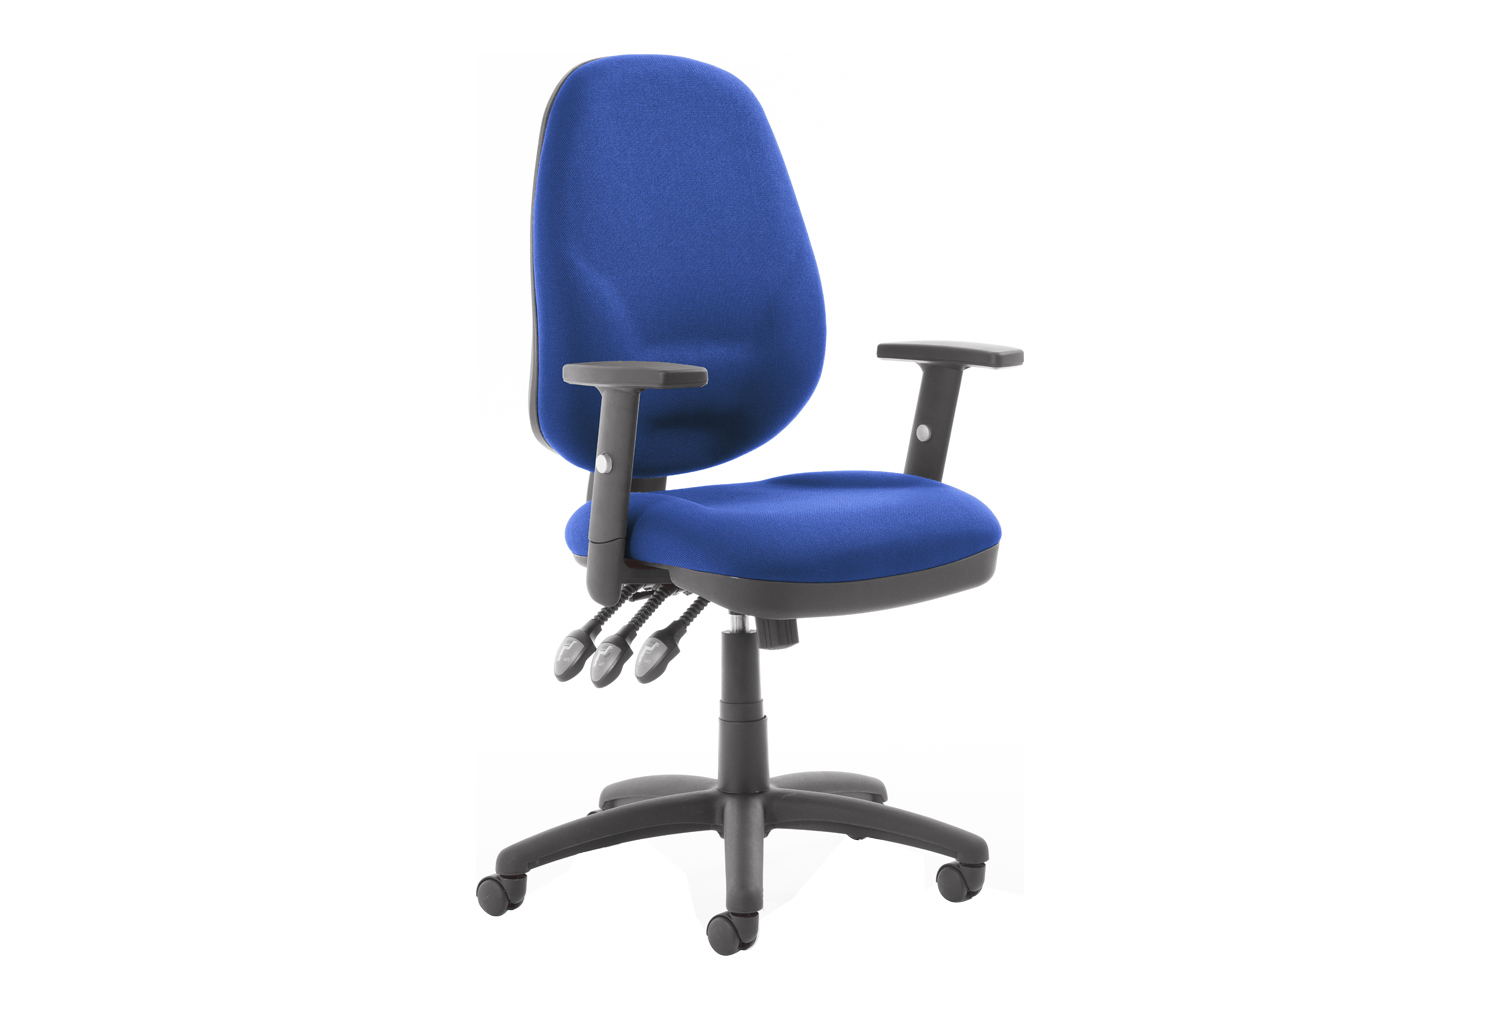 Lunar Plus XL Operator Office Chair With Adjustable Arms, Blue, Express Delivery